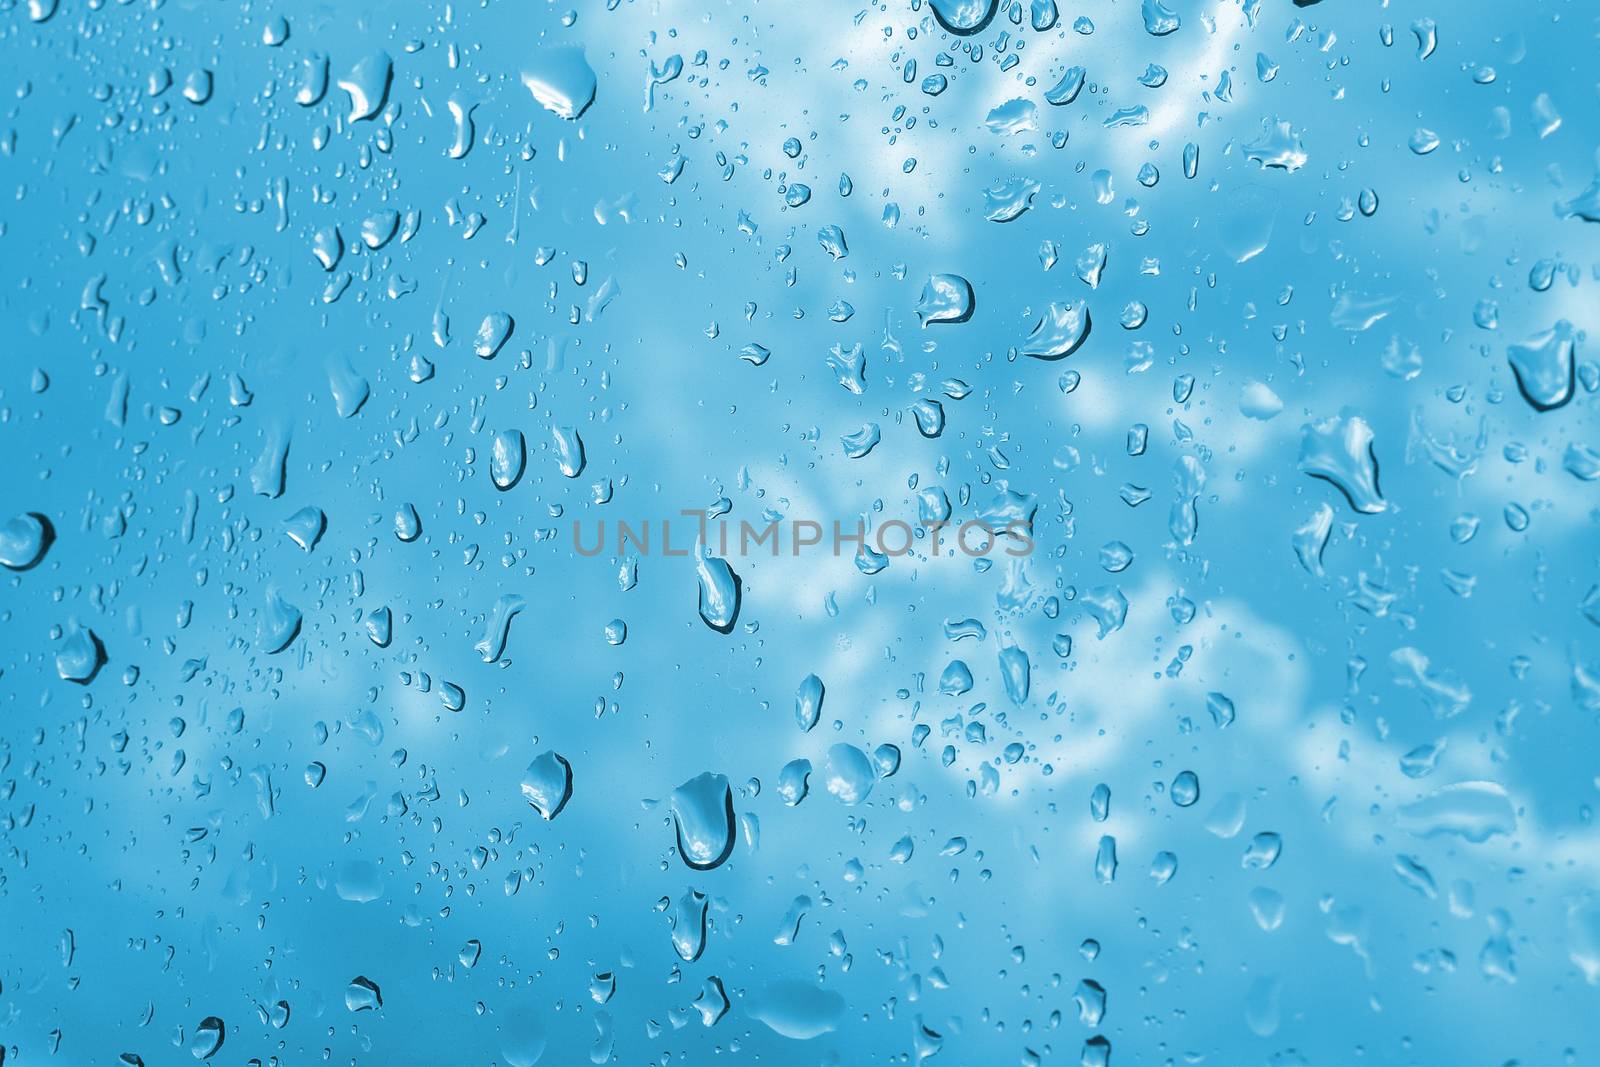 Raindrop in the window glass. by GraffiTimi